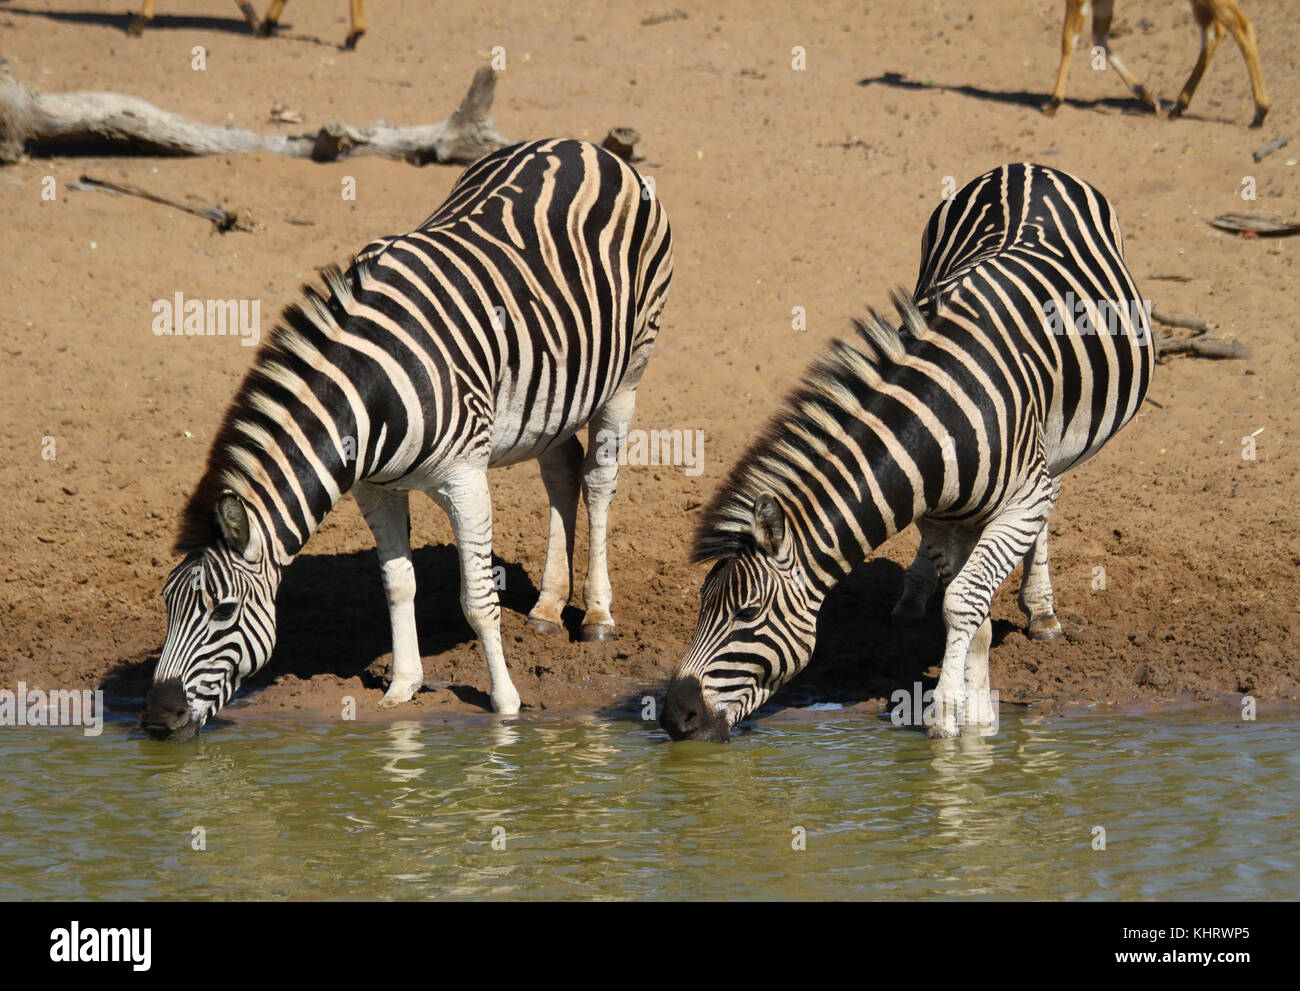 Zebras at the watering hole in Mkuze Game Reserve, South Africa Stock Photo